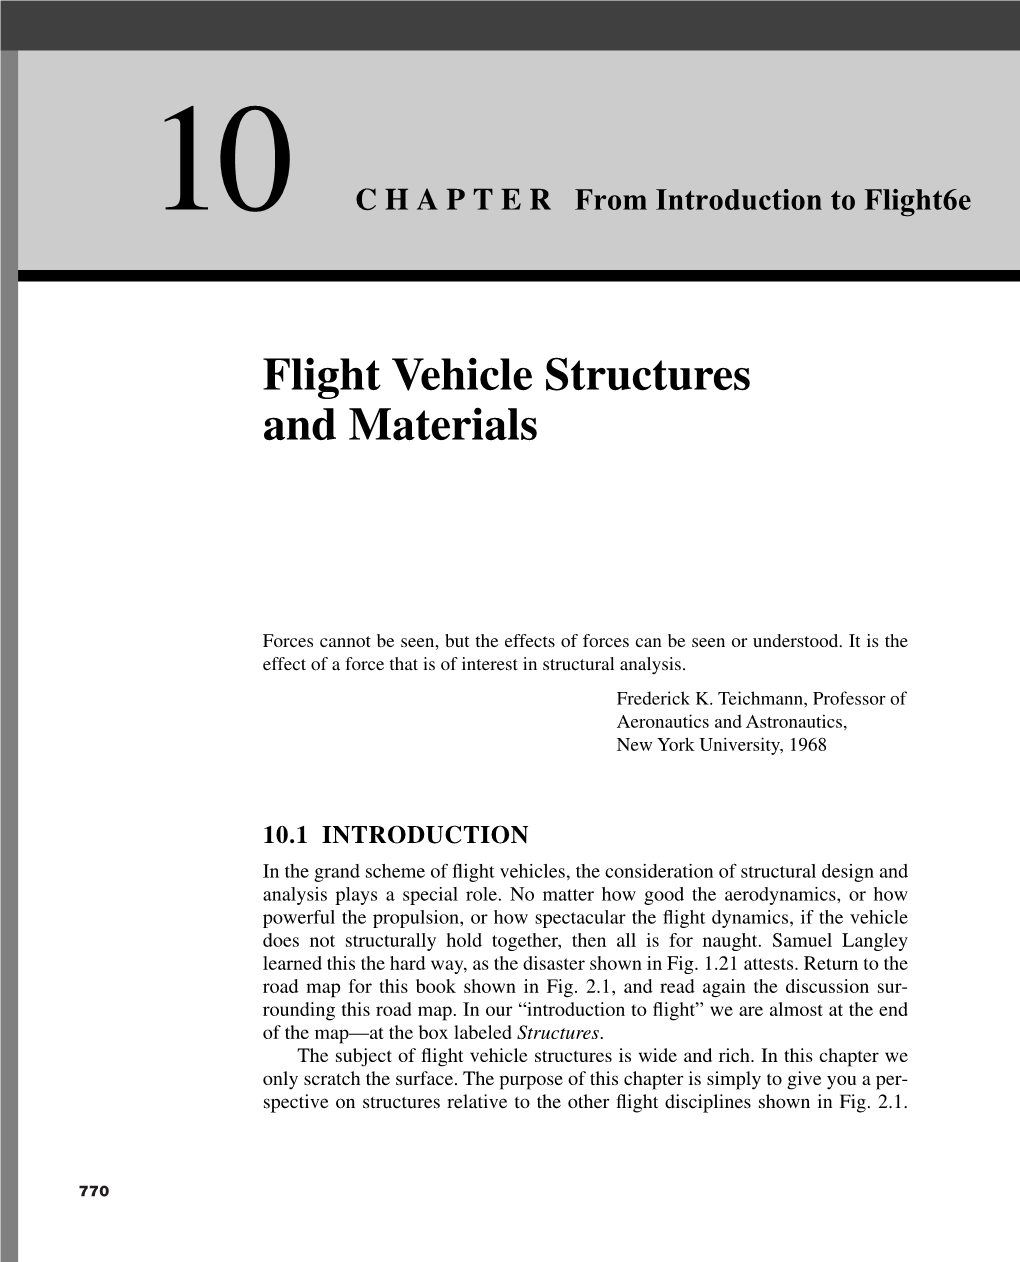 Flight Vehicle Structures and Materials